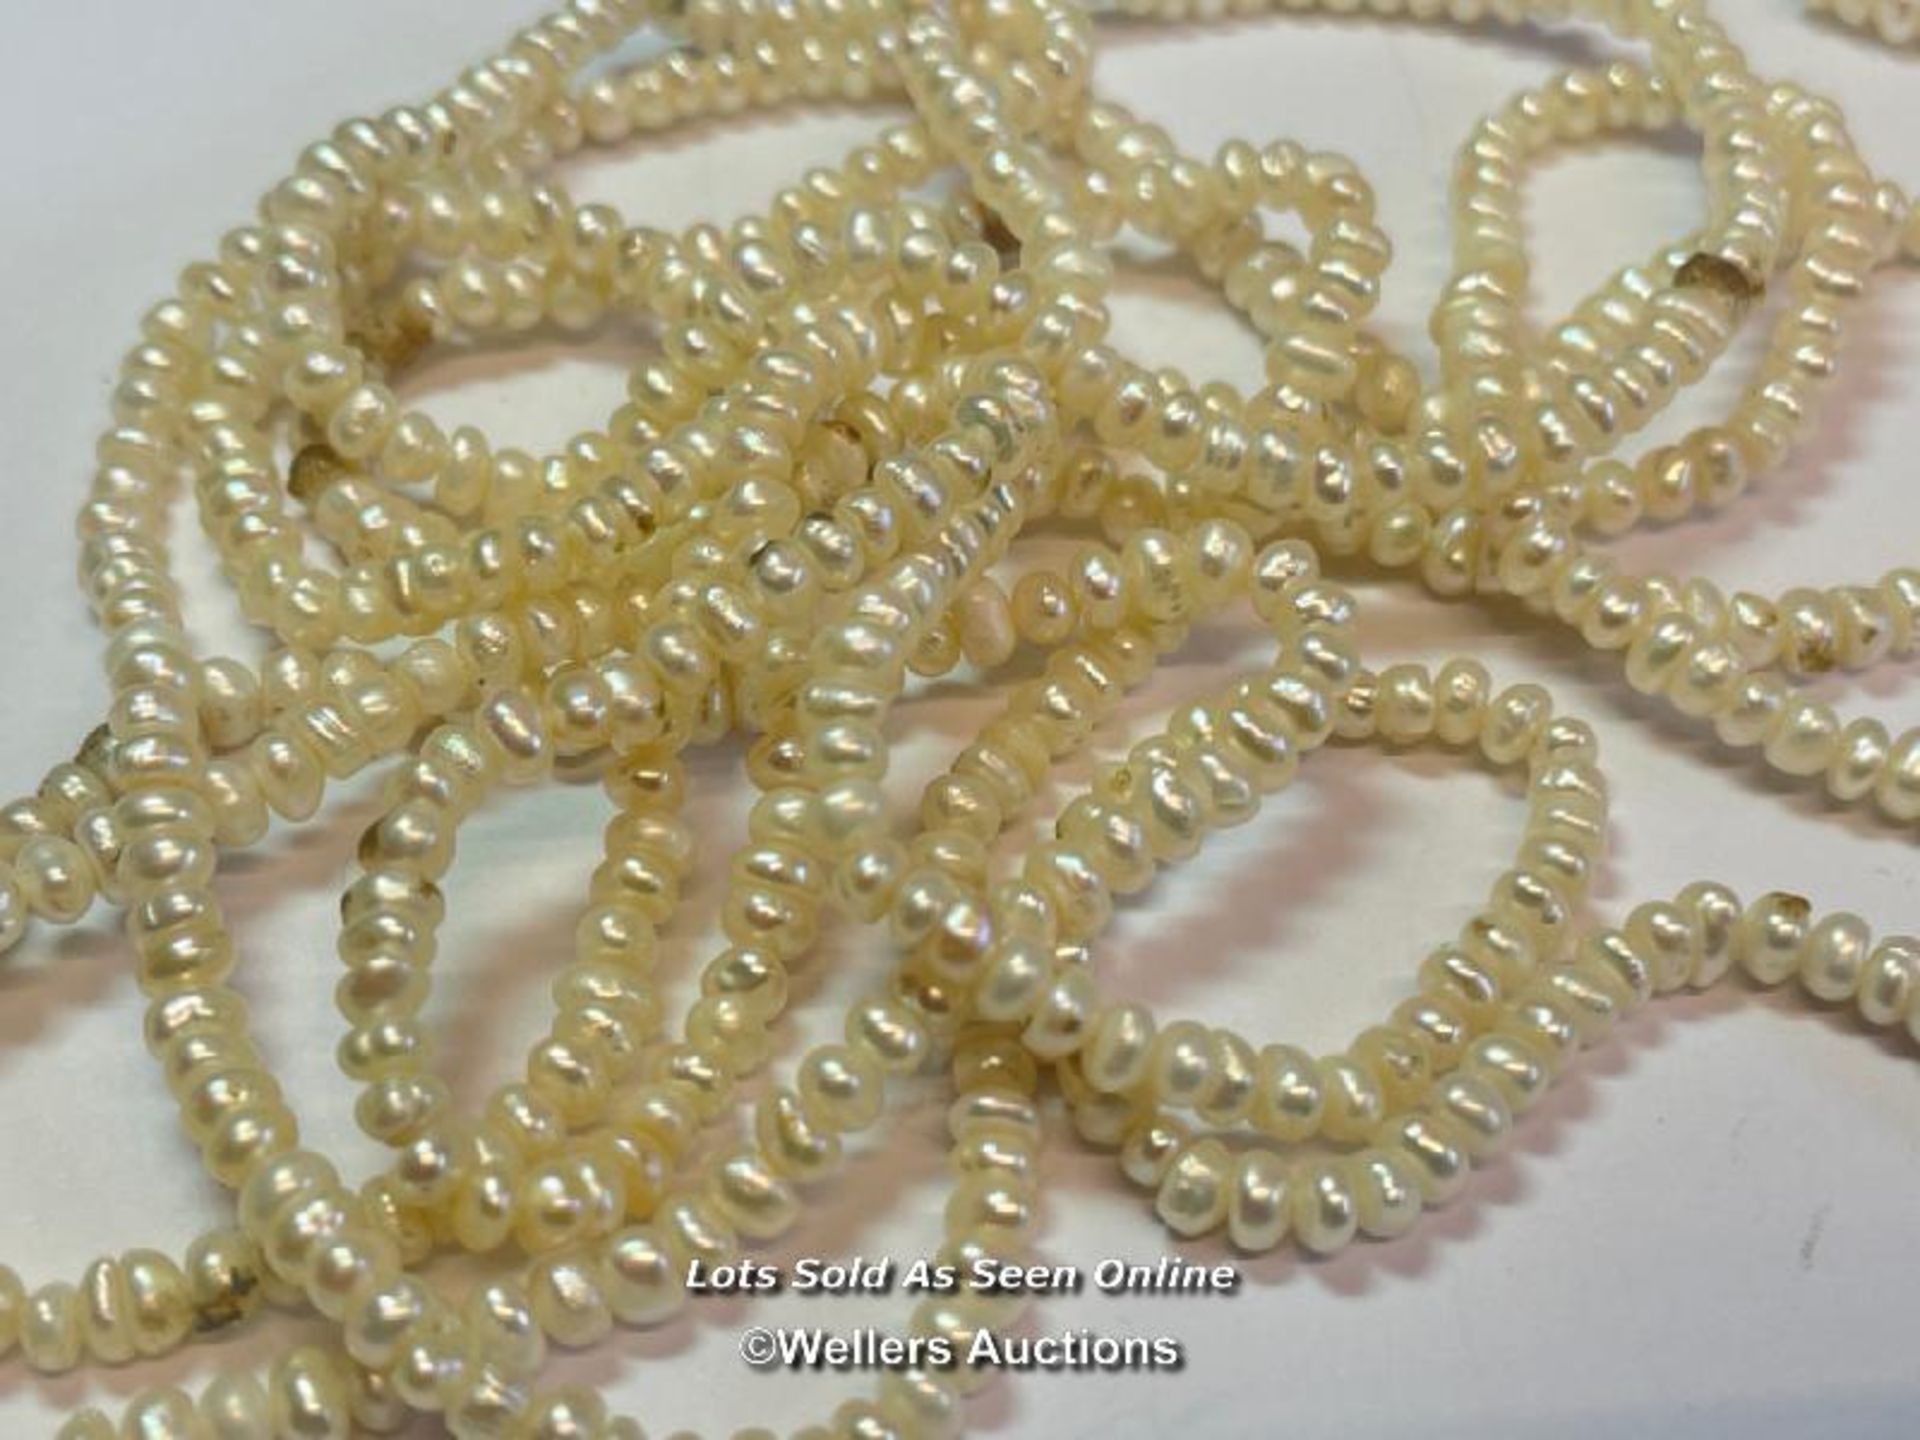 TWO LONG UNKNOTTED ROWS OF FRESHWATER PEARLS, EACH ROW APPROX. 148CM - Image 2 of 3